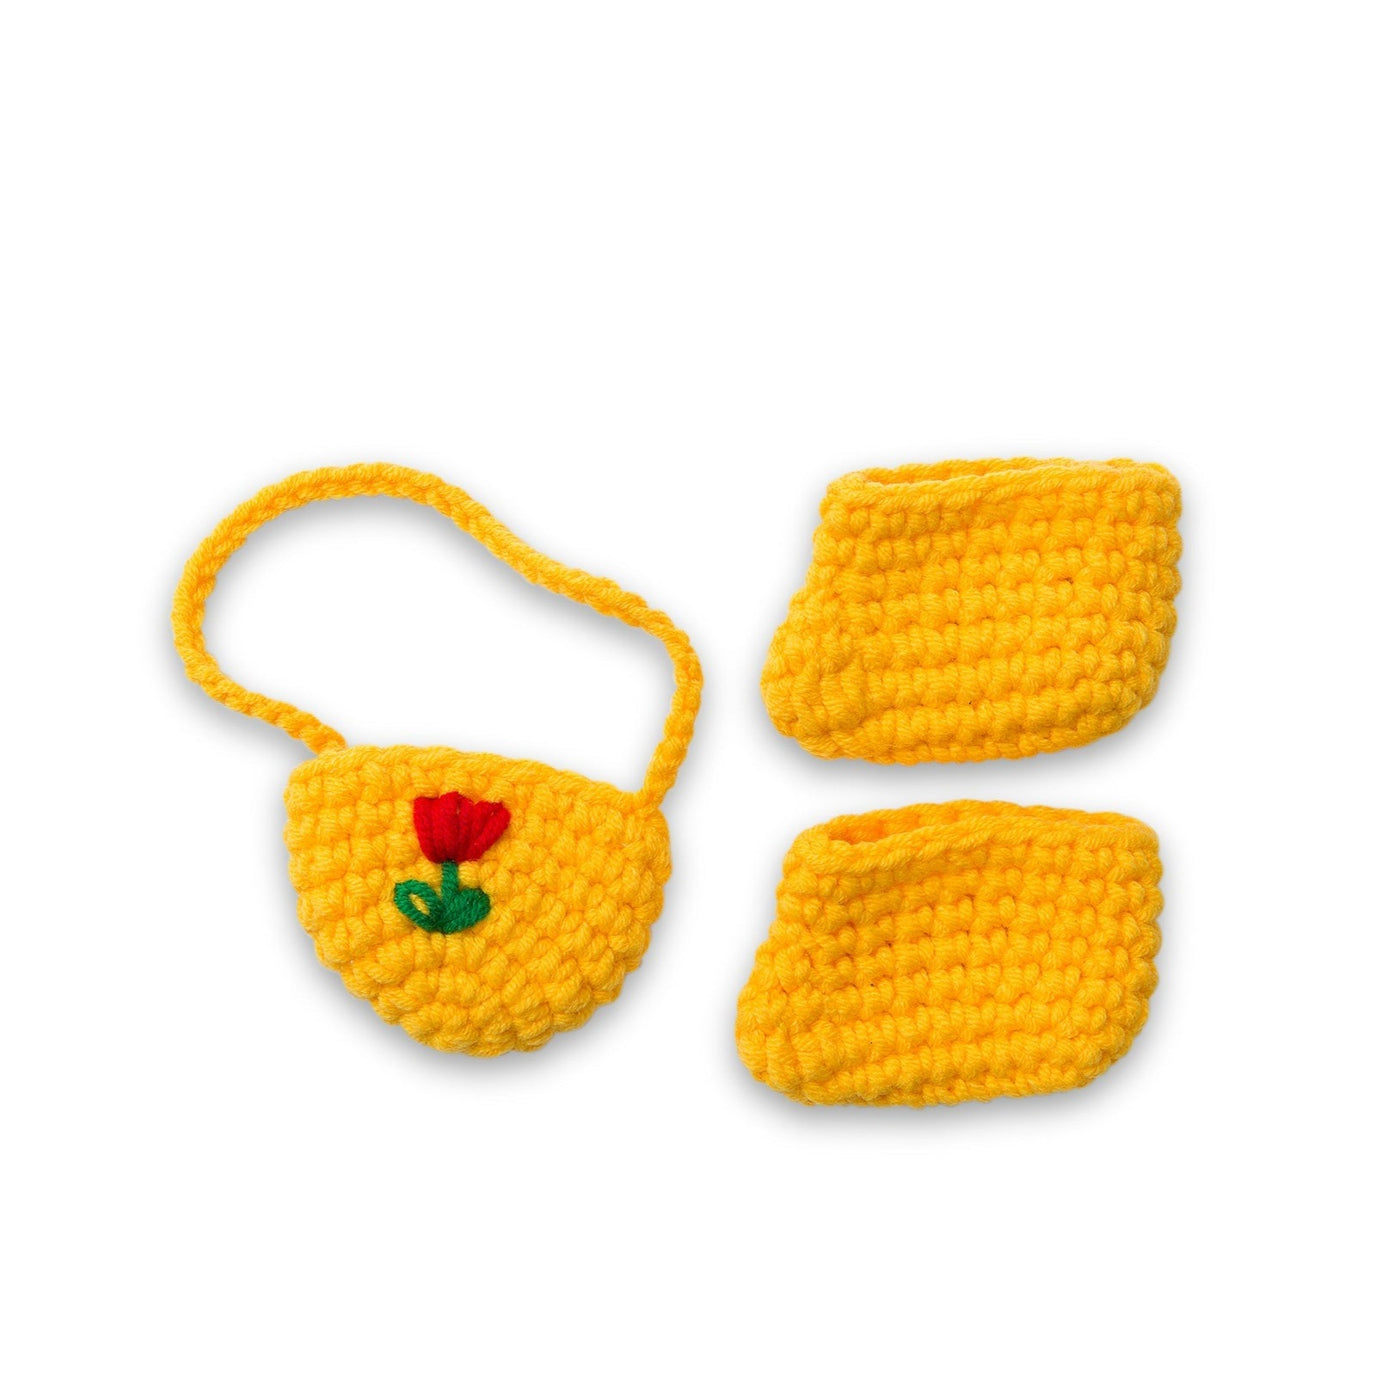 Crocheted Mini Tulip Bag and Shoes